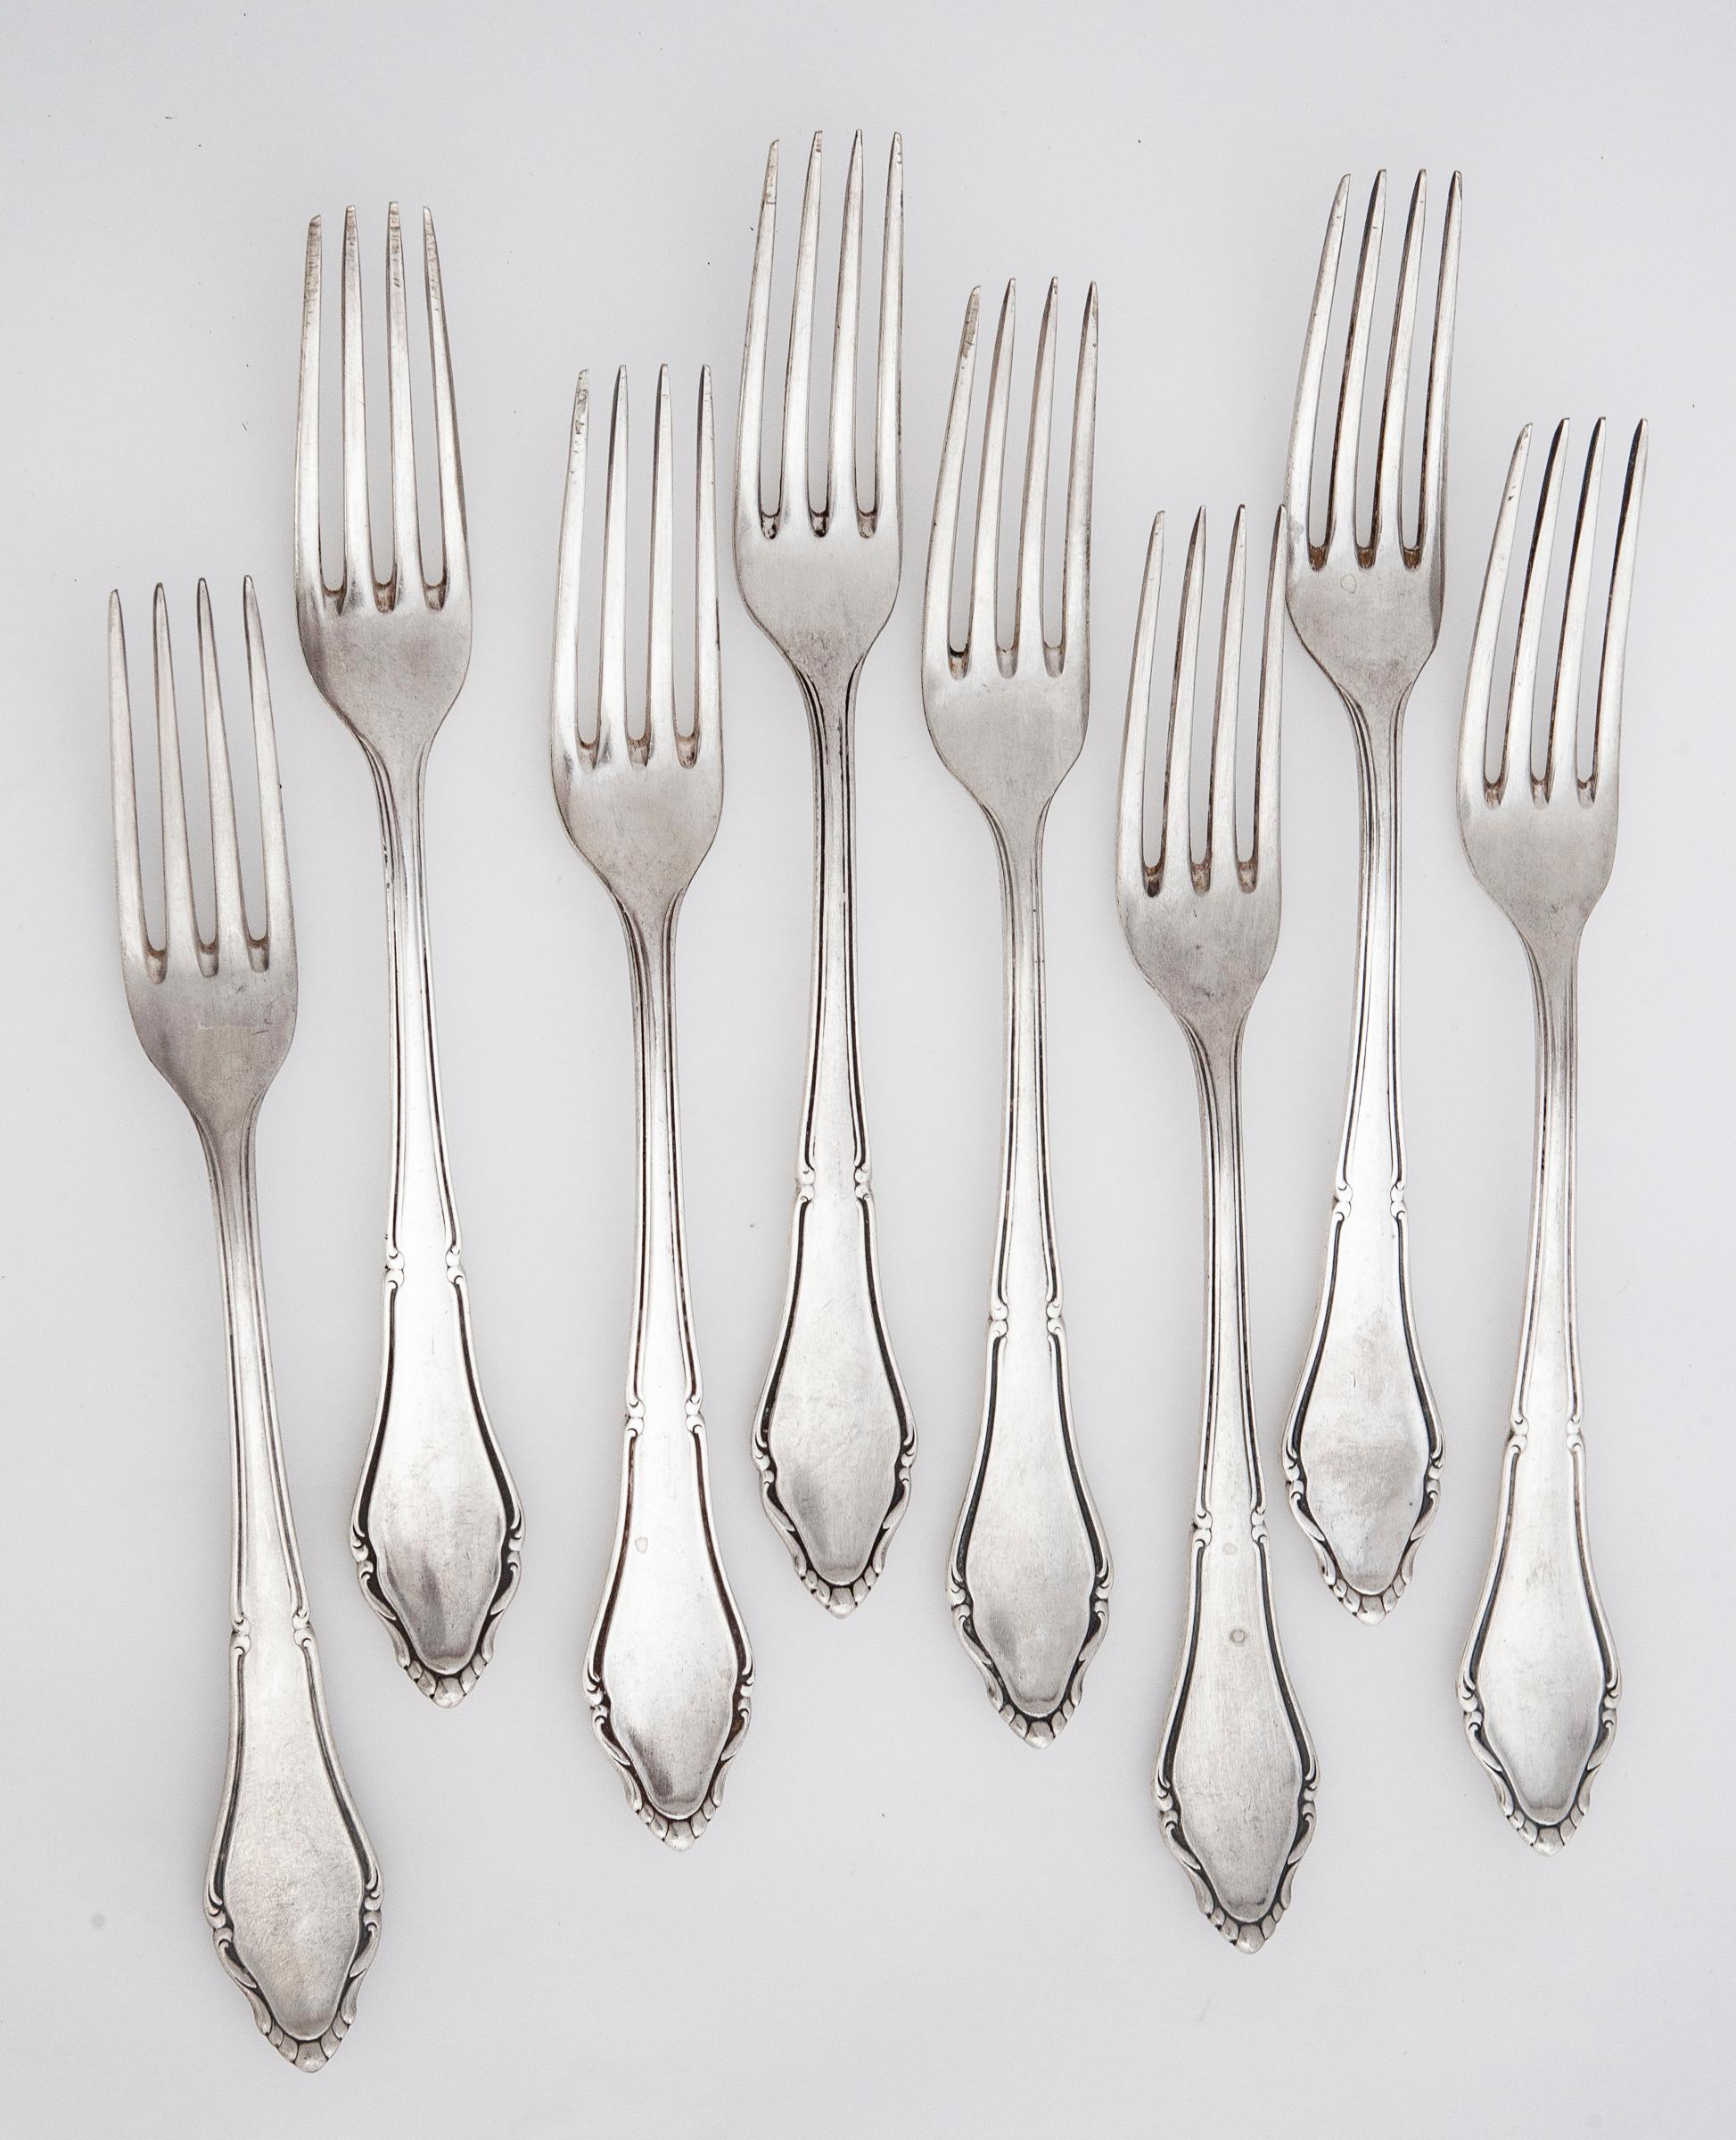 This flatware set is from one of the oldest & finest silverplate manufacturers in Germany.
 On separate listings, you will find knives, spoons both large & small & serving pieces as well.